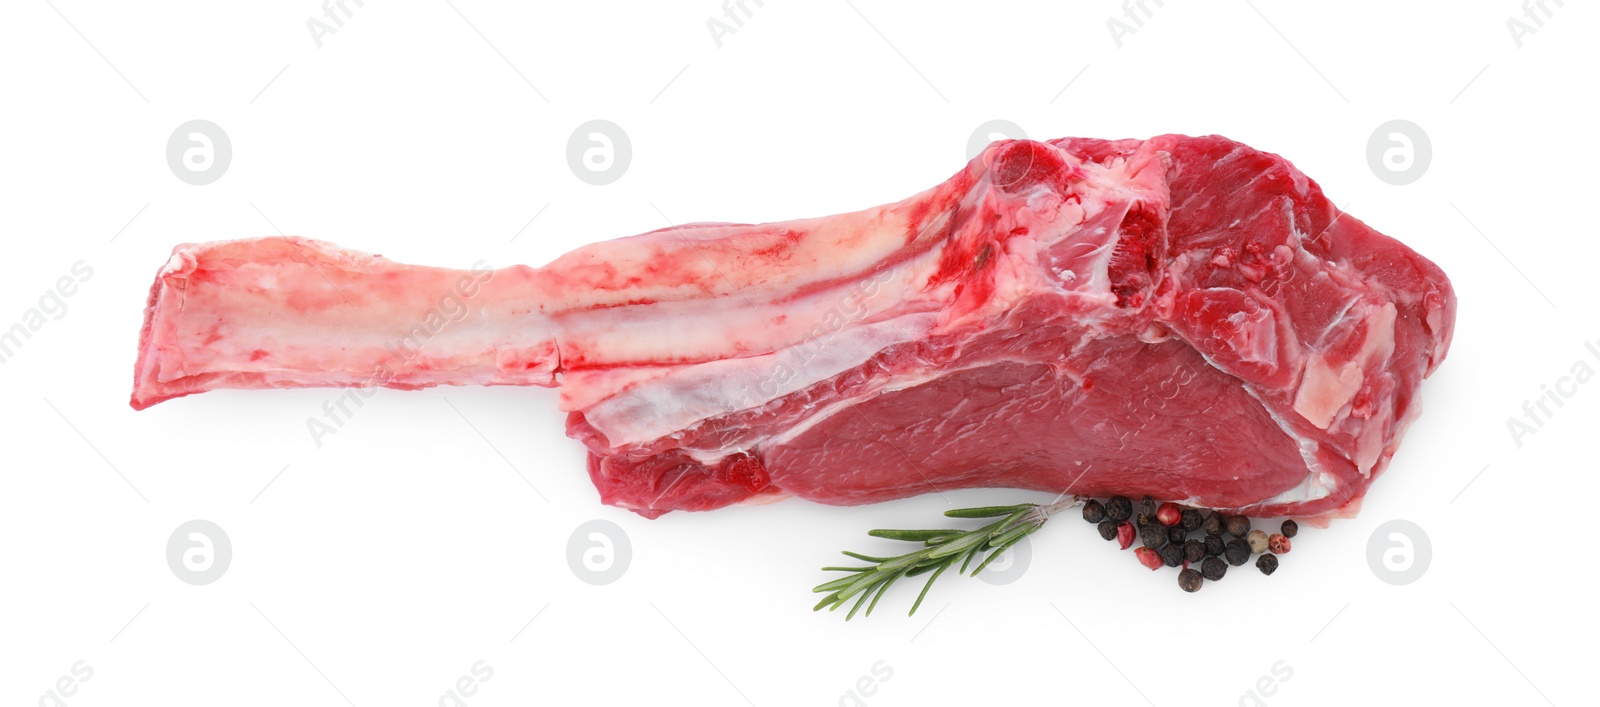 Photo of Piece of raw beef meat and spices isolated on white